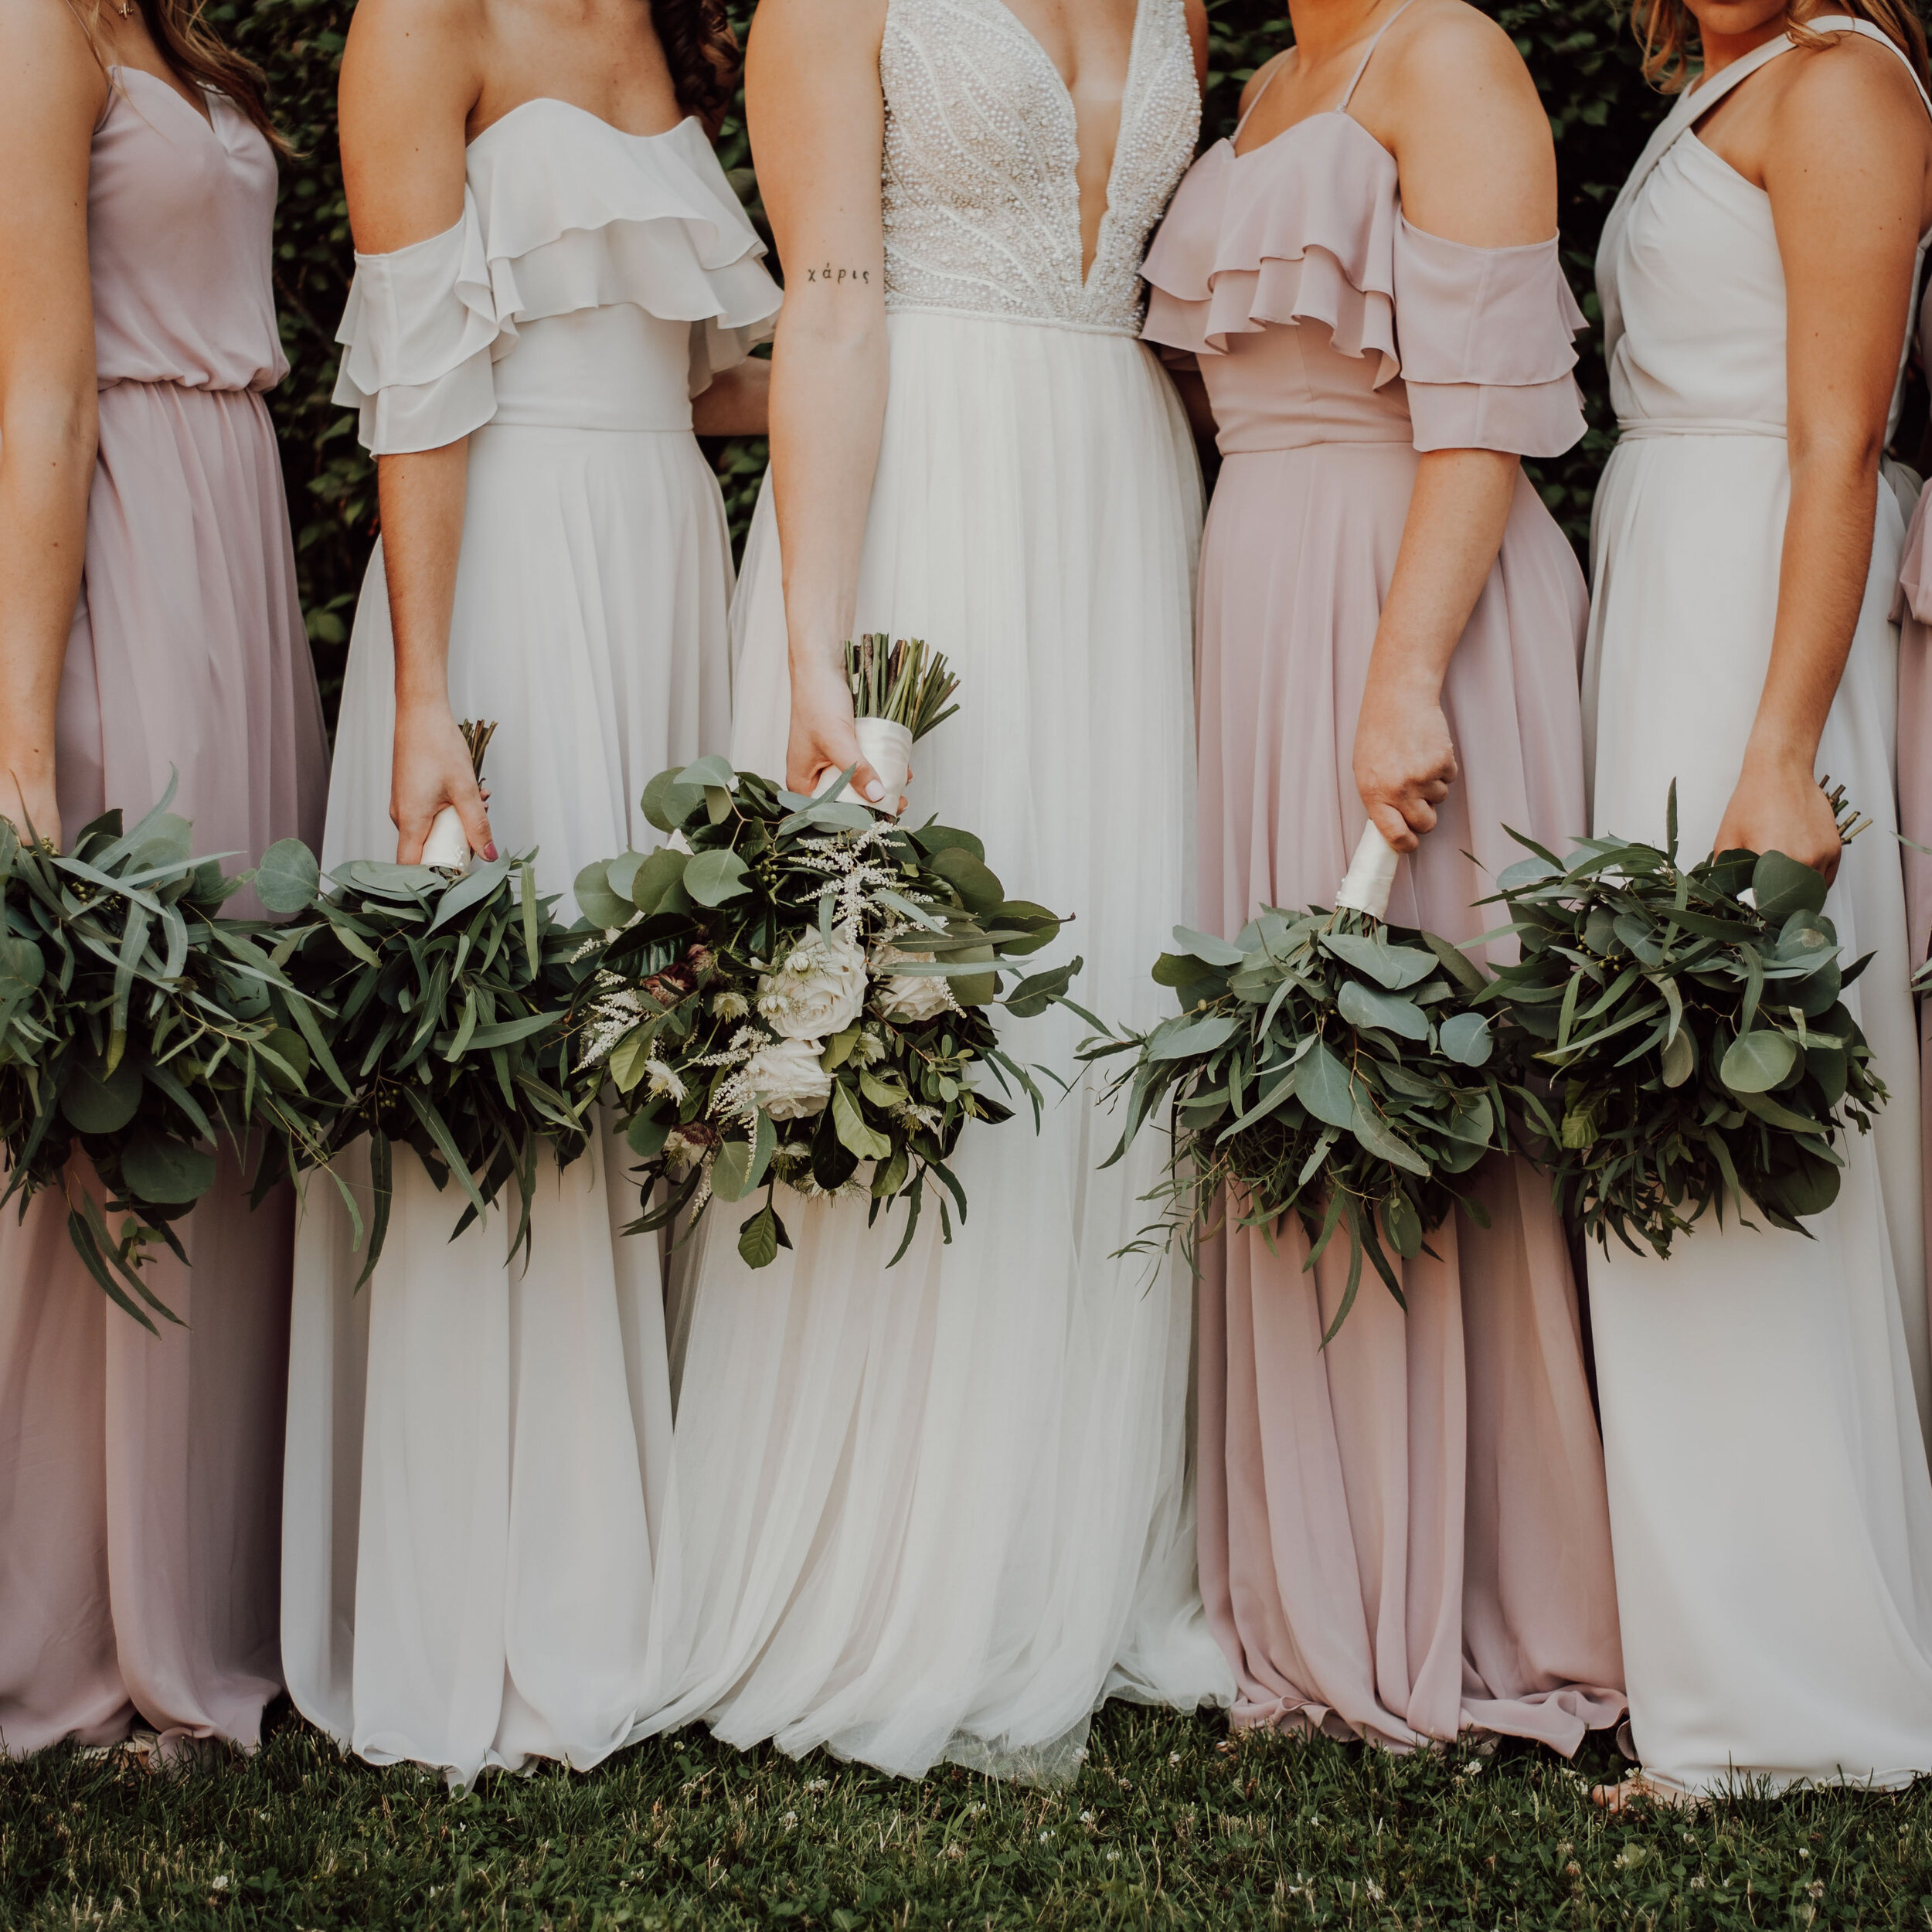 how to get rid of bridesmaid dresses